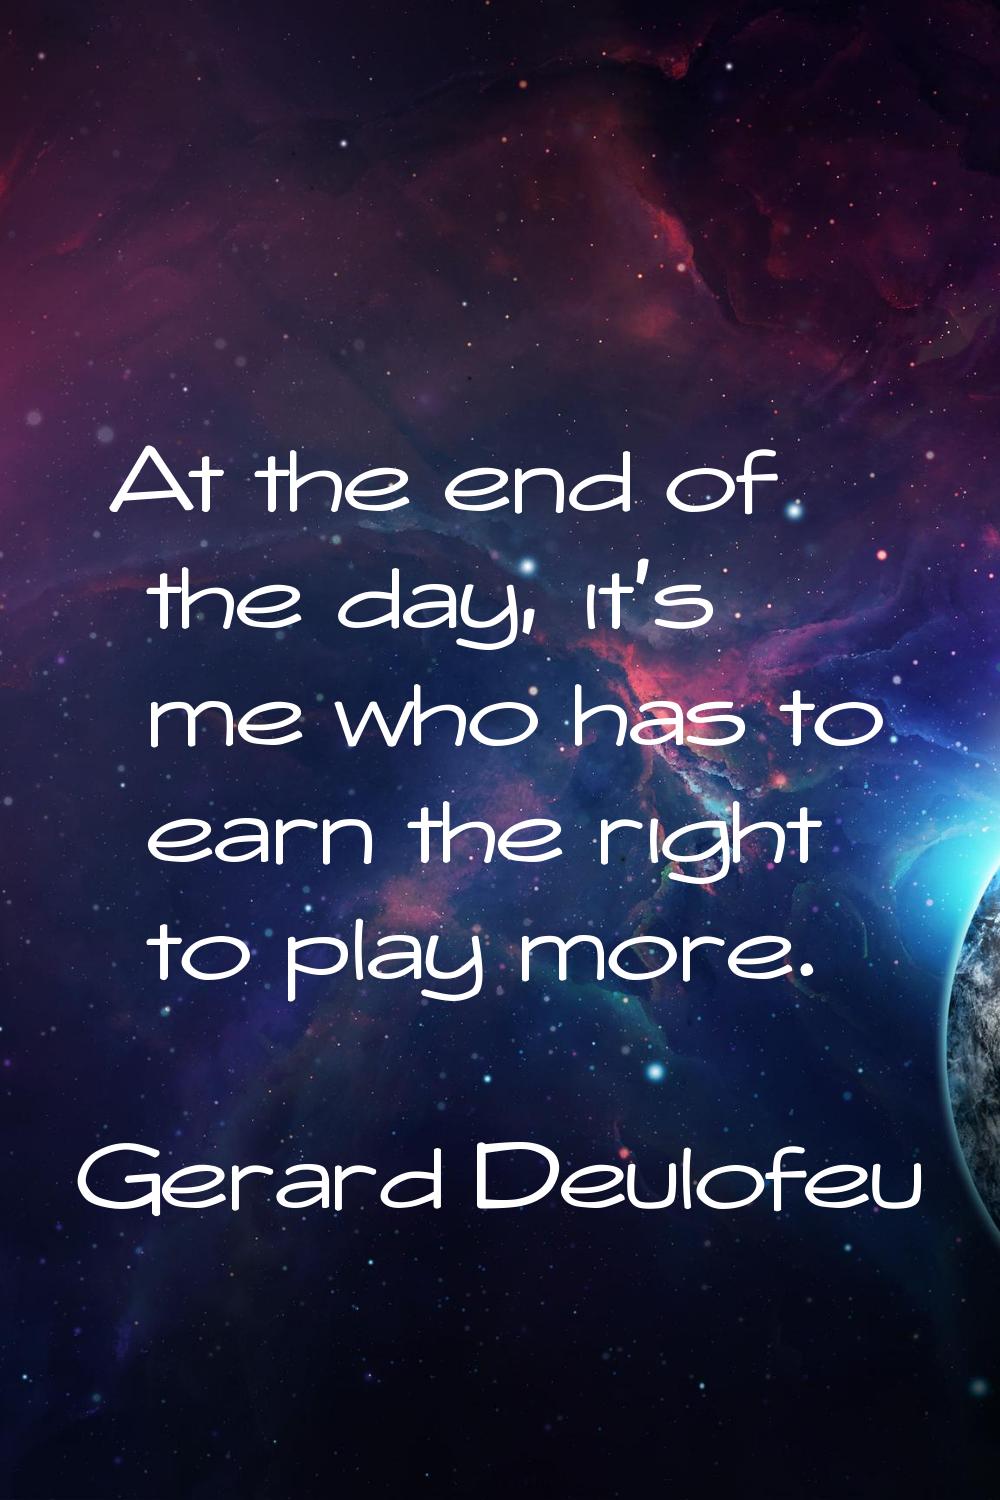 At the end of the day, it's me who has to earn the right to play more.